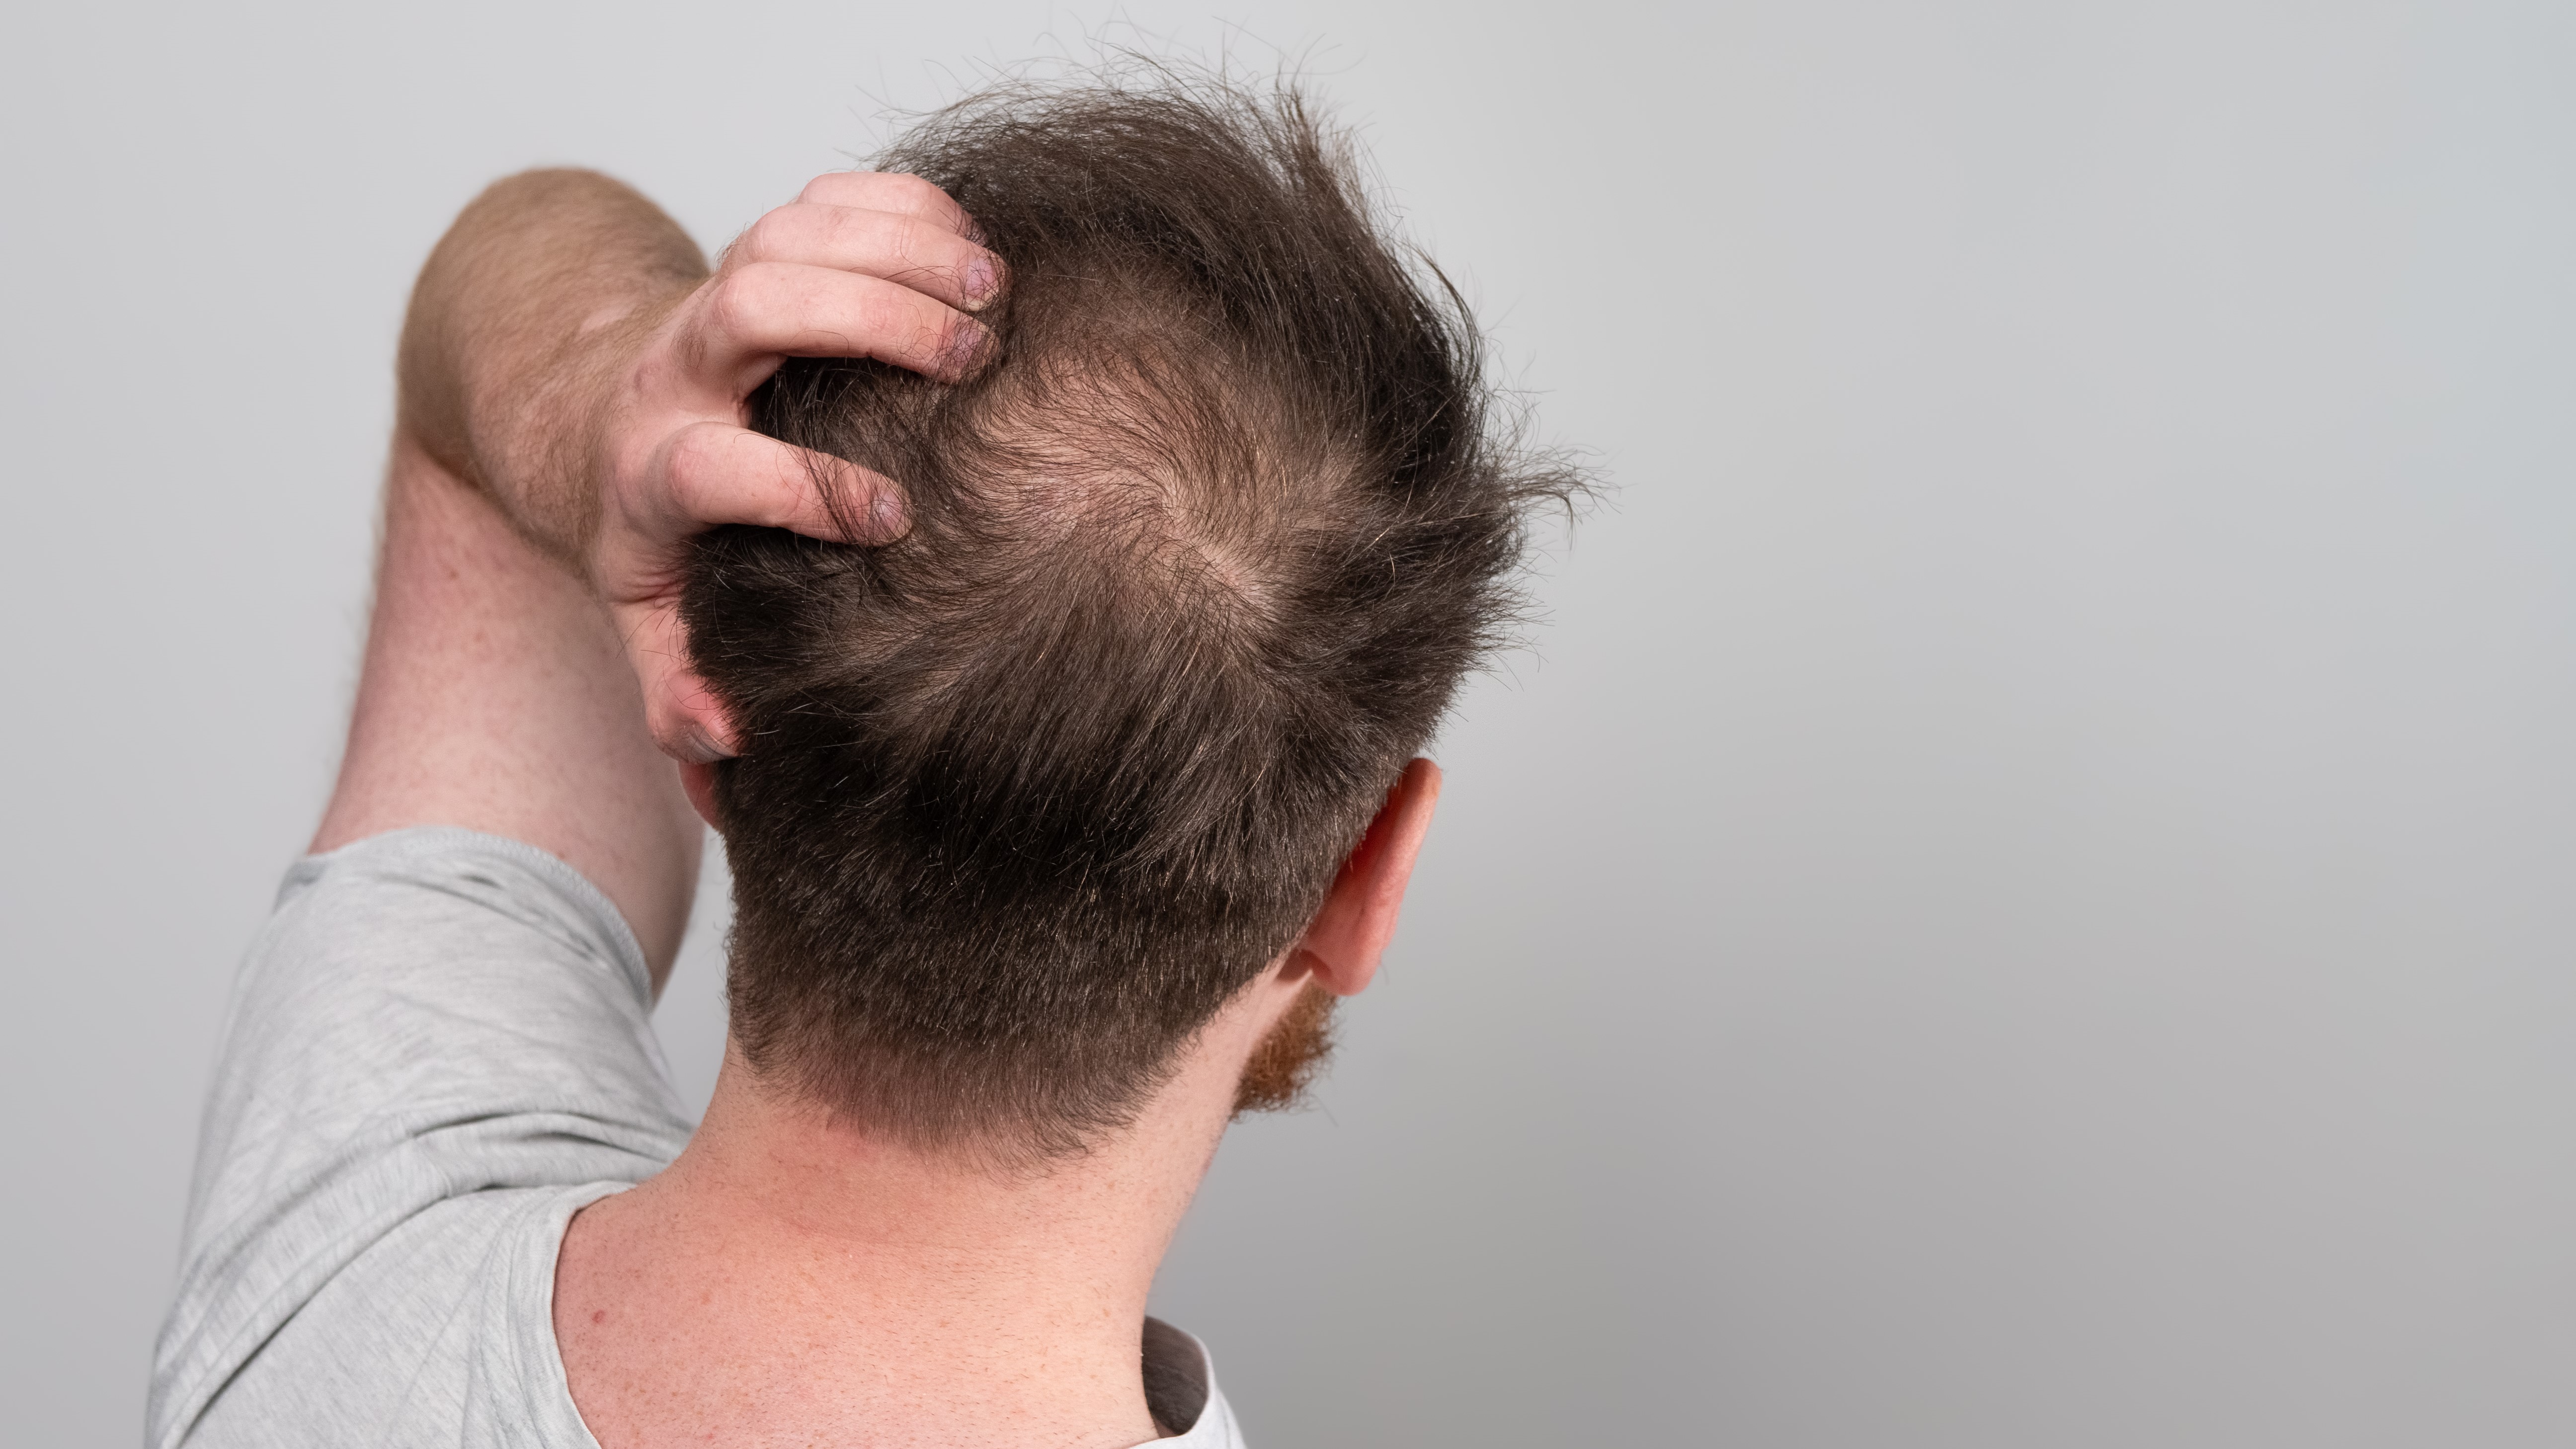 Sugary drinks linked to hair loss in younger men - study